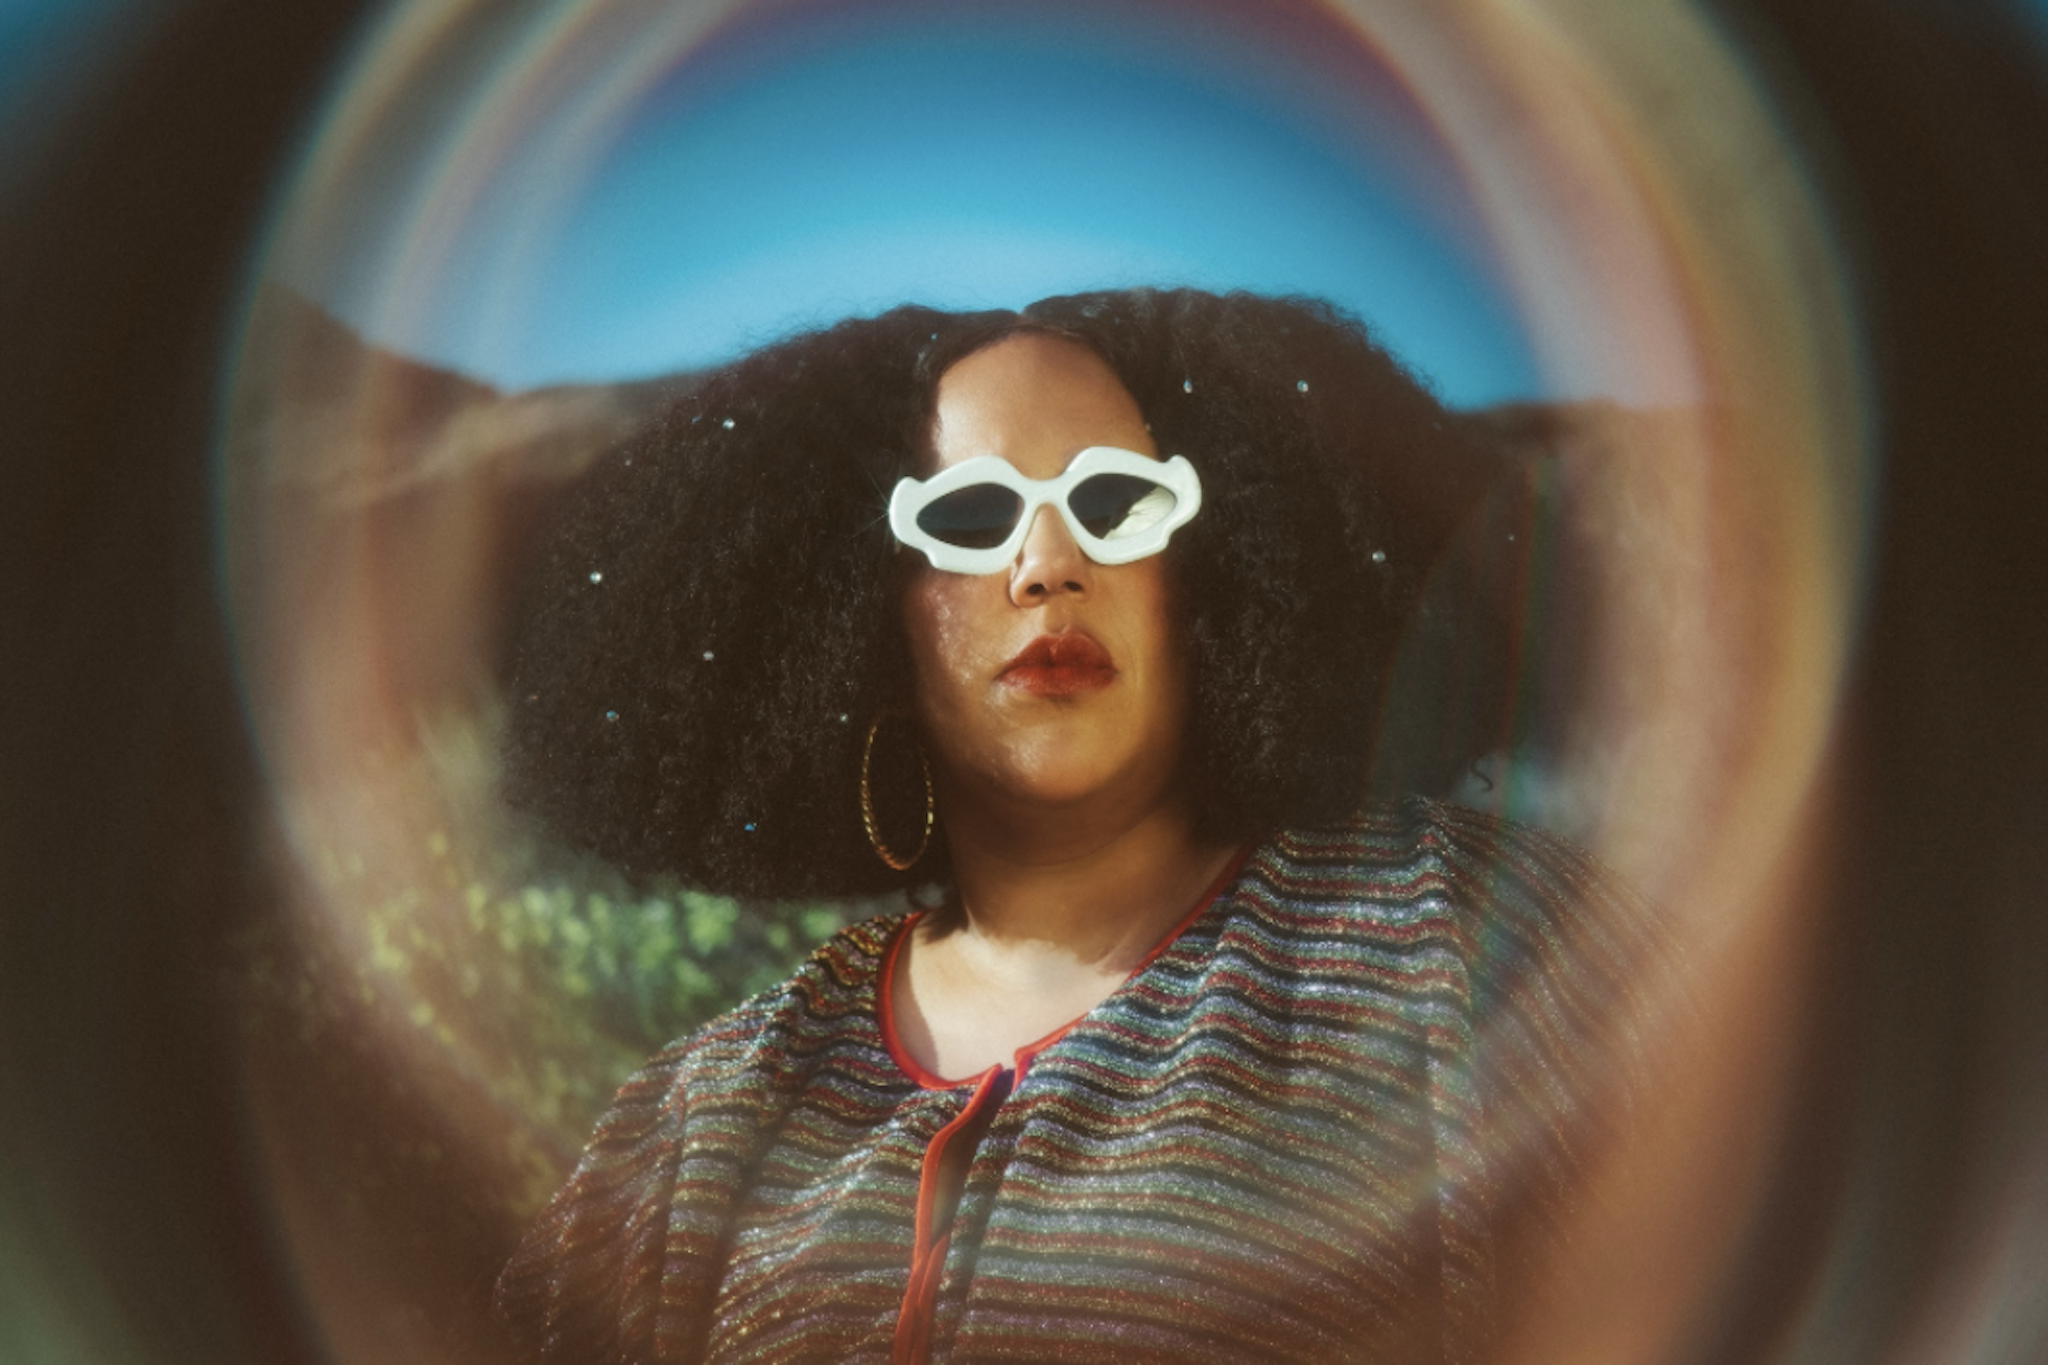 ‘Visiting Nashville and meeting people who loved themselves helped me figure out why I wasn’t happy,’ says Brittany Howard